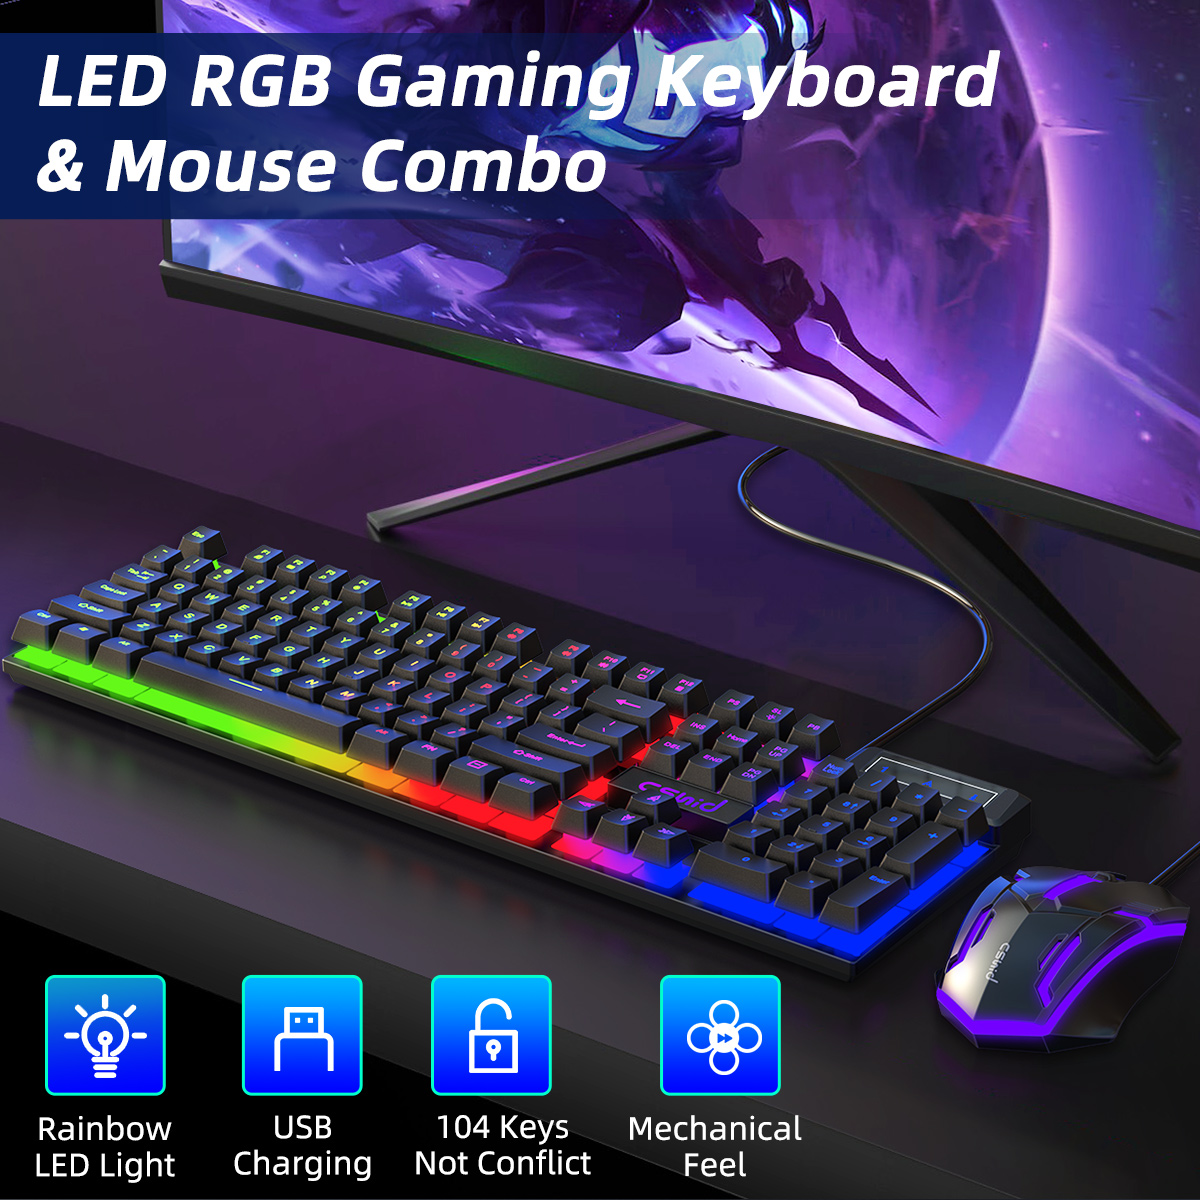 Wired Gaming Keyboard & Mouse Combo, RGB Backlit Mechanical Feel Gaming Keyboard Mouse W/ Multimedia Keys, Anti-ghosting Keys, Spill-Resistant Keycaps for Windows PC Gamers Desktop Computer Laptop - image 2 of 7